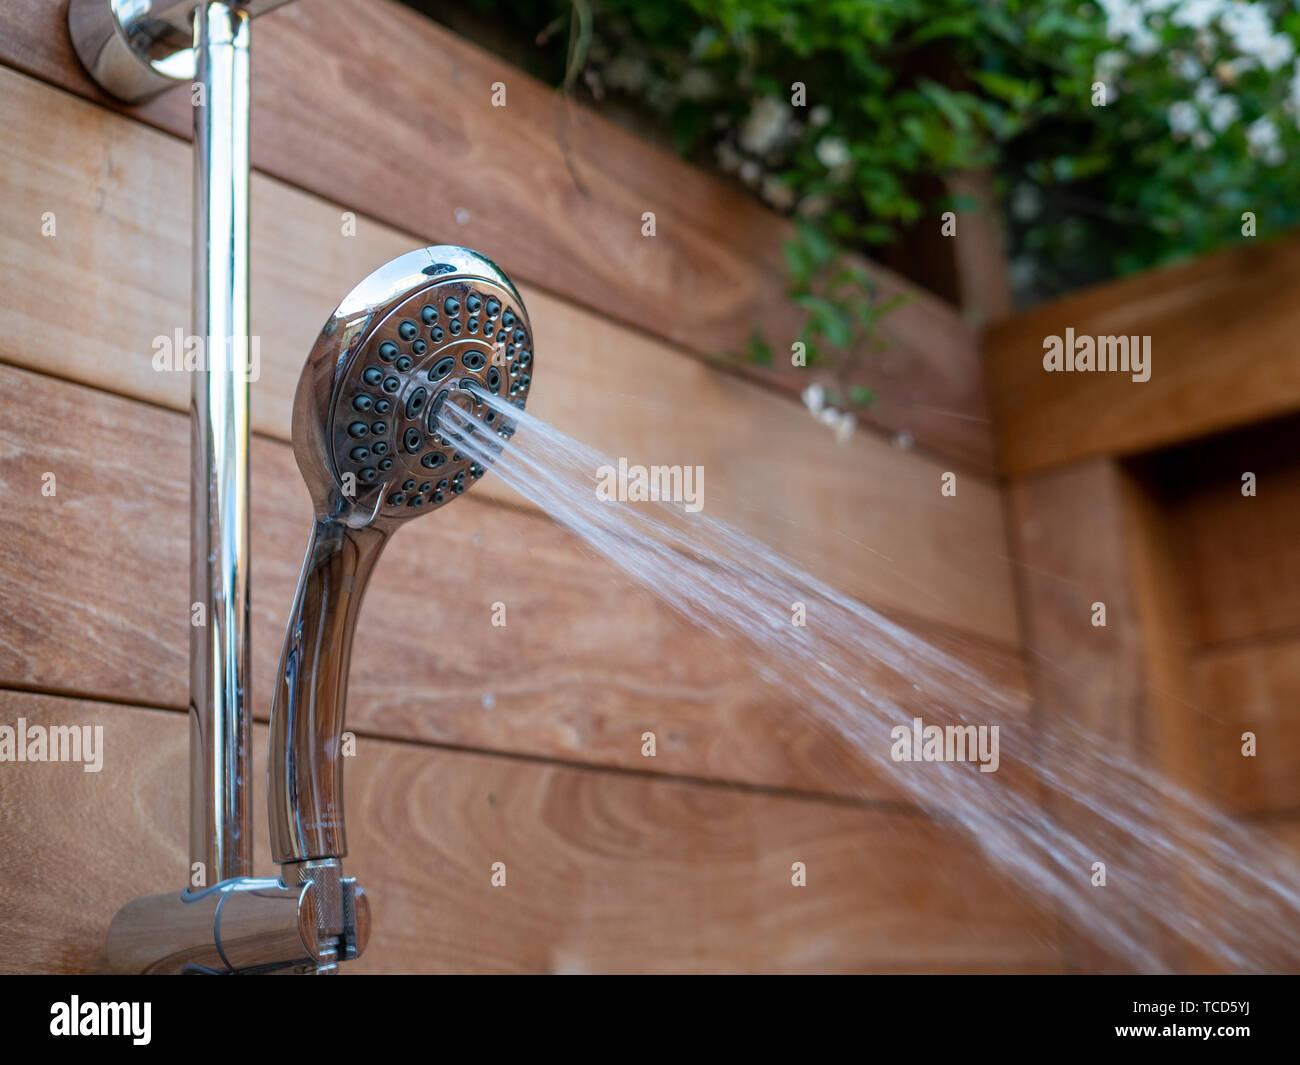 https://c8.alamy.com/comp/TCD5YJ/water-steams-flowing-out-of-handheld-shower-head-in-outdoor-shower-TCD5YJ.jpg